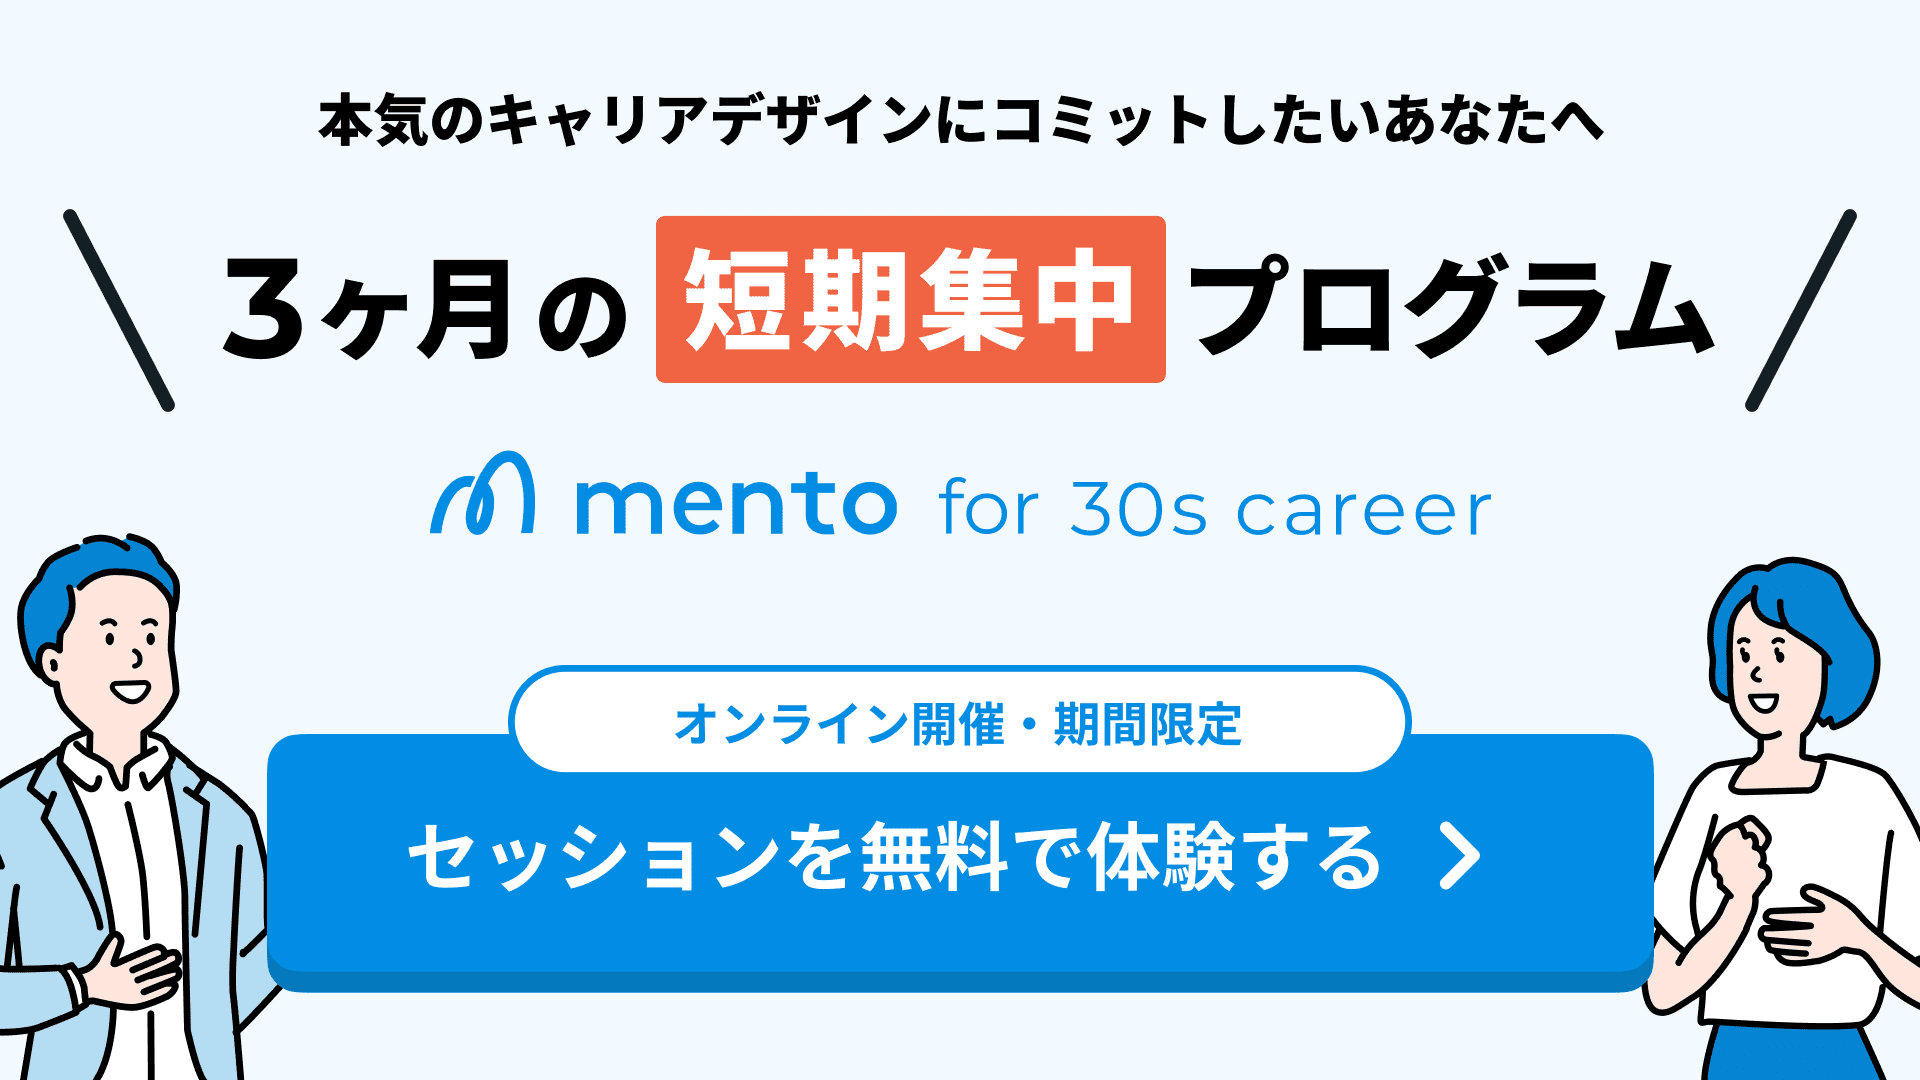 mento for 30s career